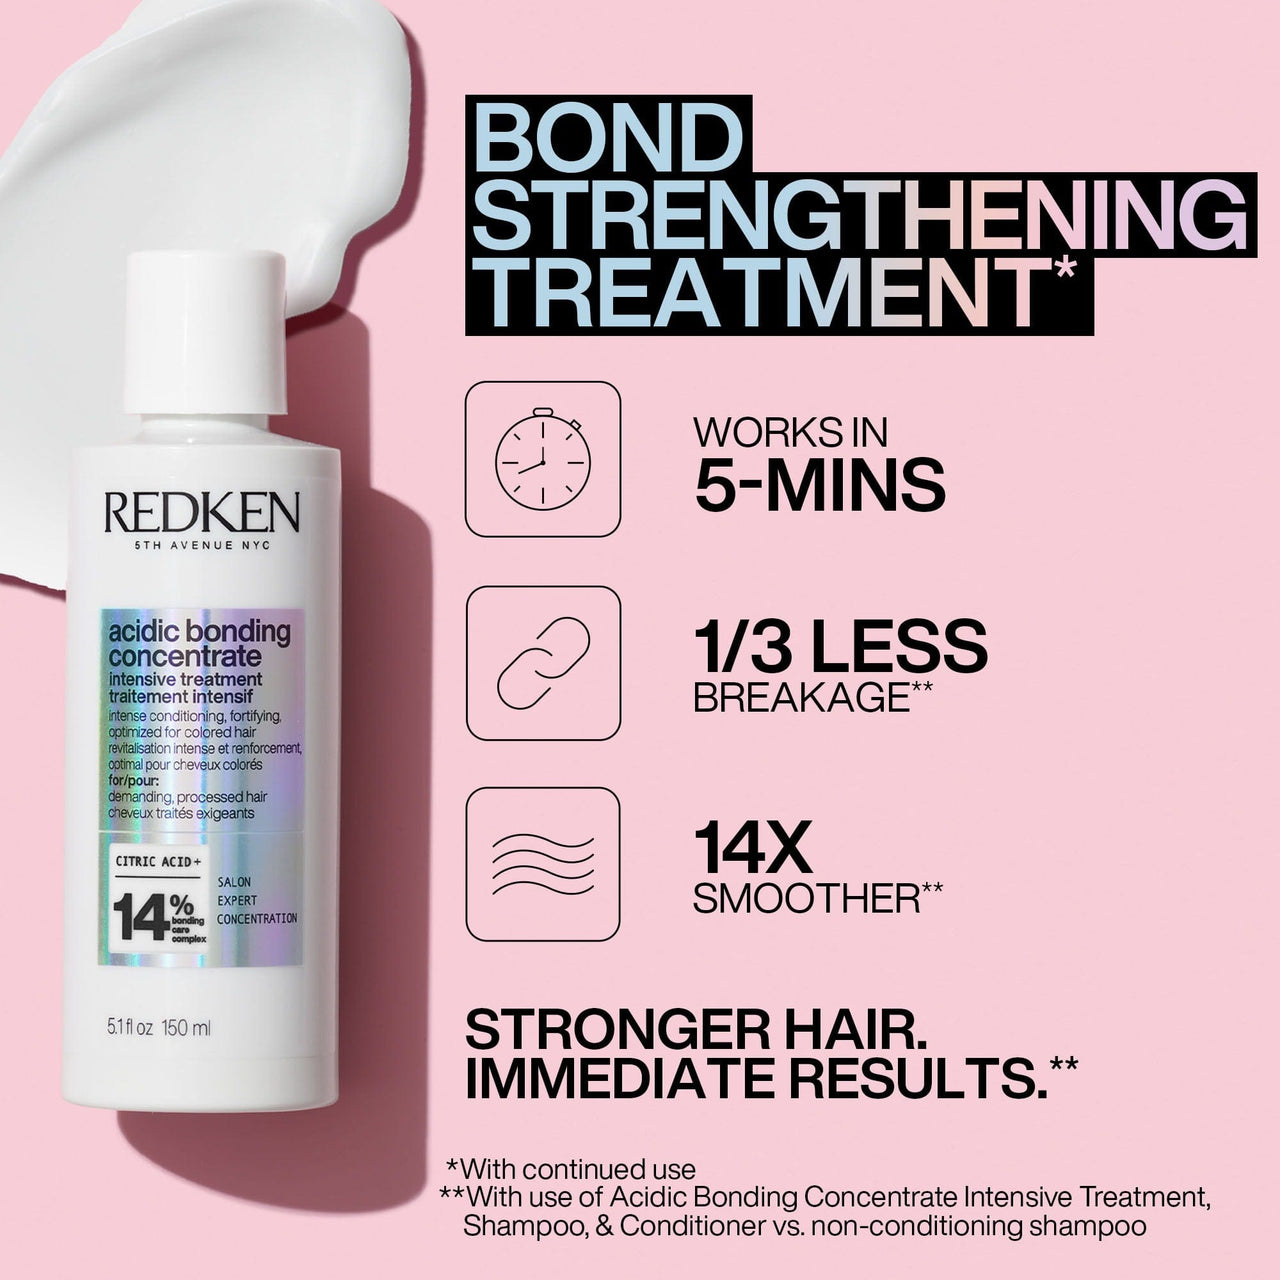 REDKEN_Acidic Bonding Concentrate Intensive Treatment_Cosmetic World